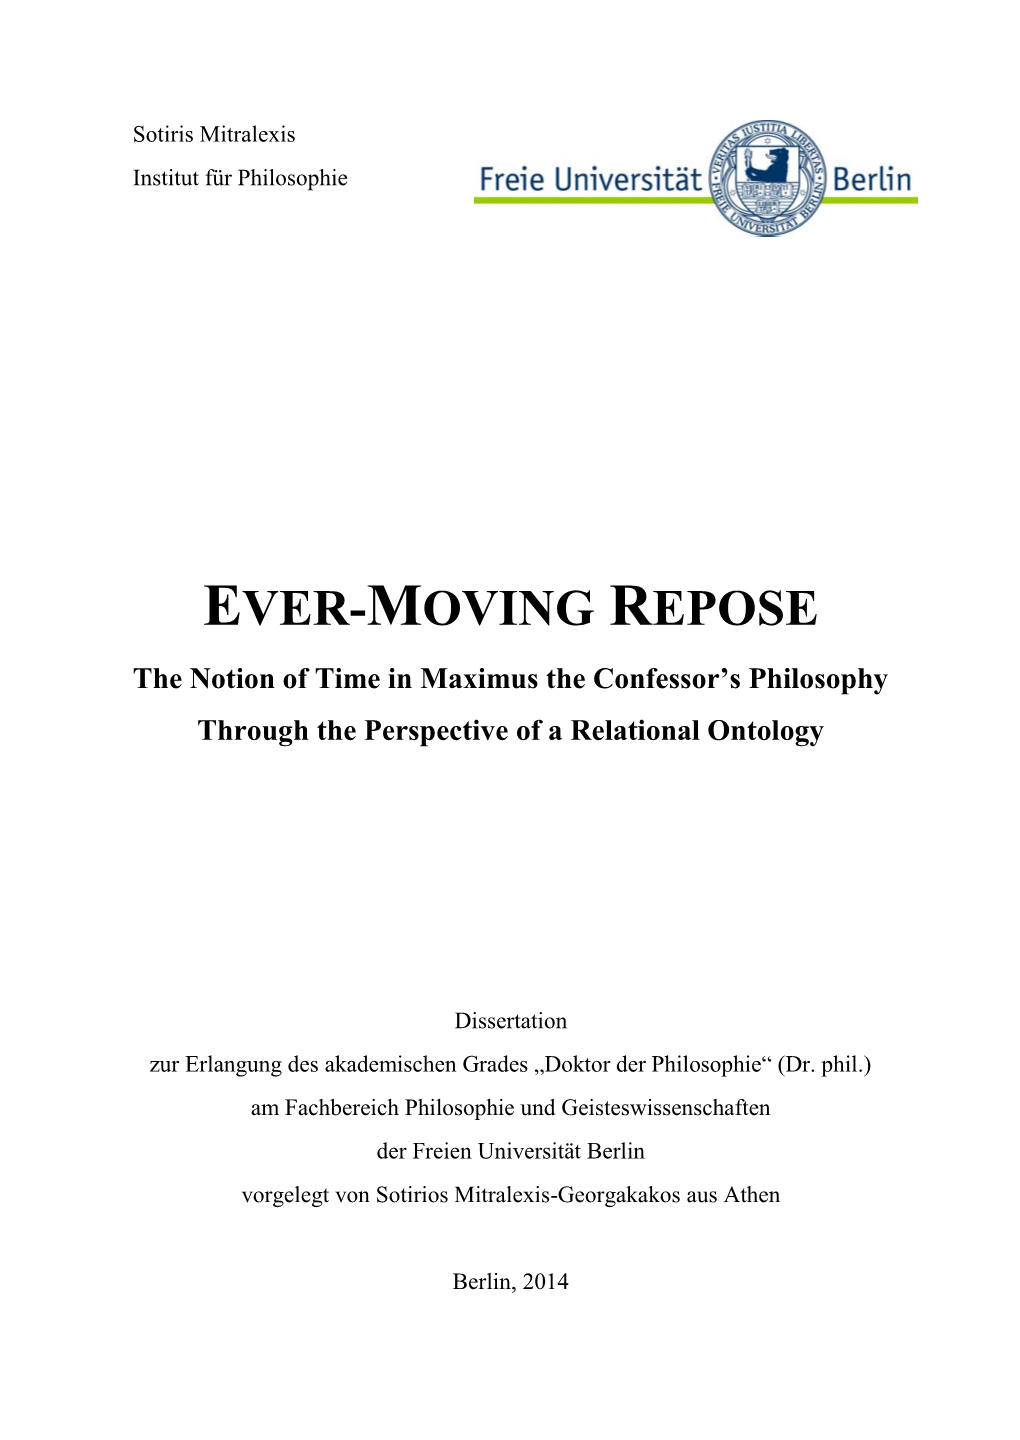 EVER-MOVING REPOSE the Notion of Time in Maximus the Confessor’S Philosophy Through the Perspective of a Relational Ontology